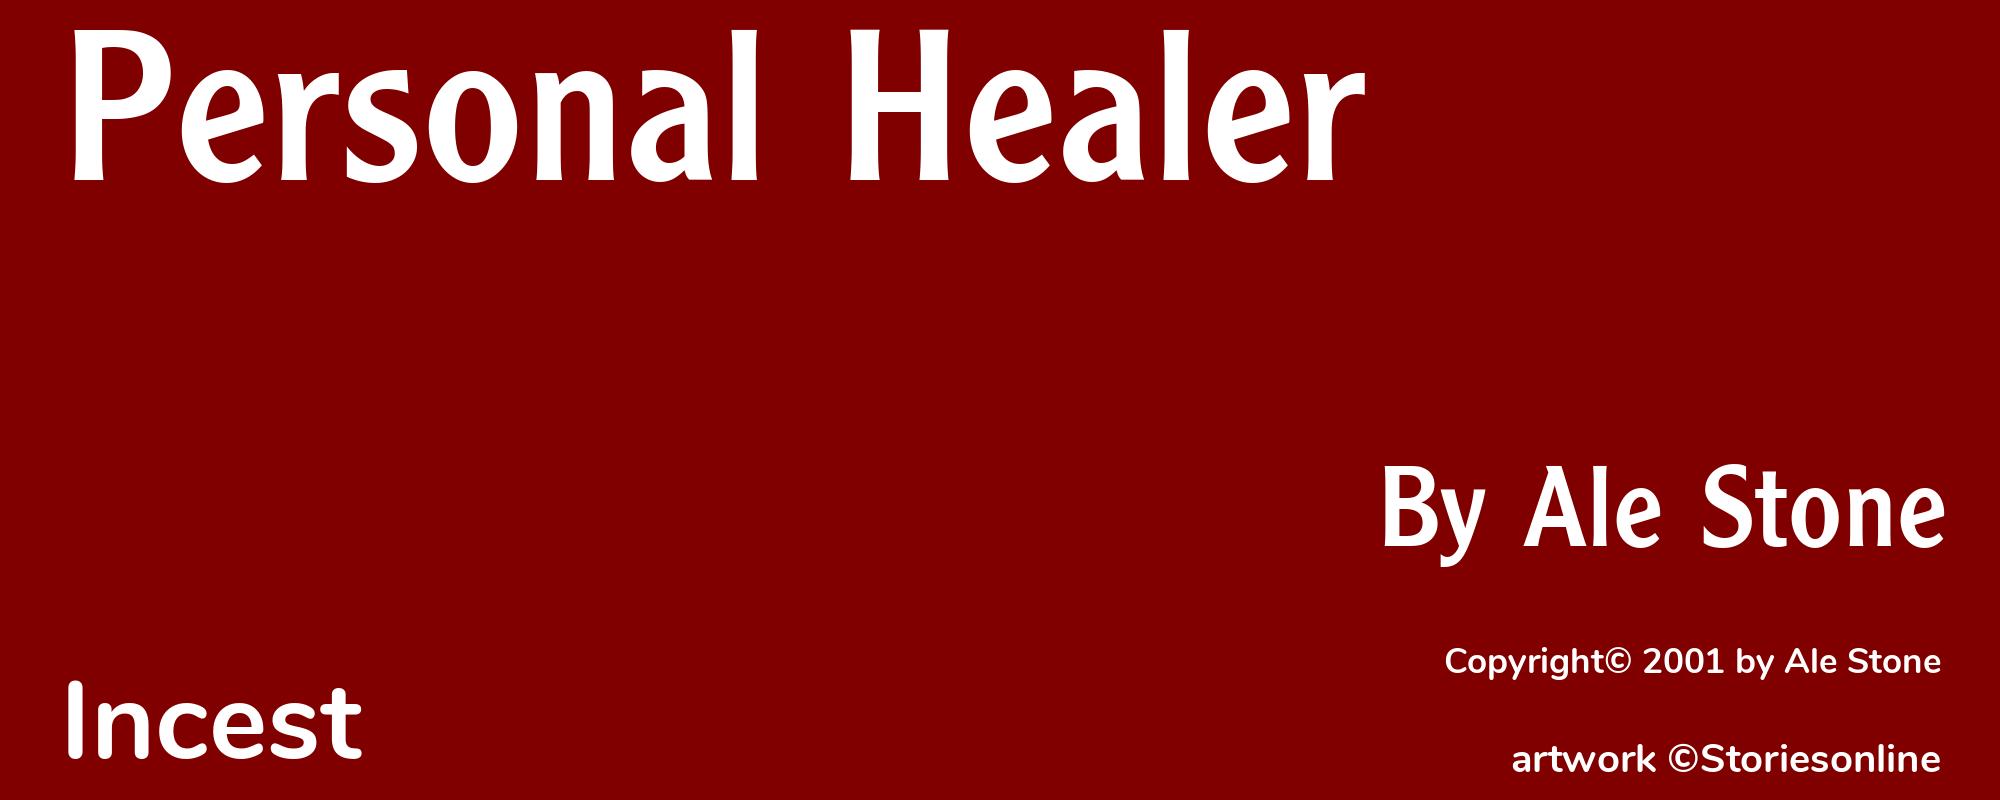 Personal Healer - Cover